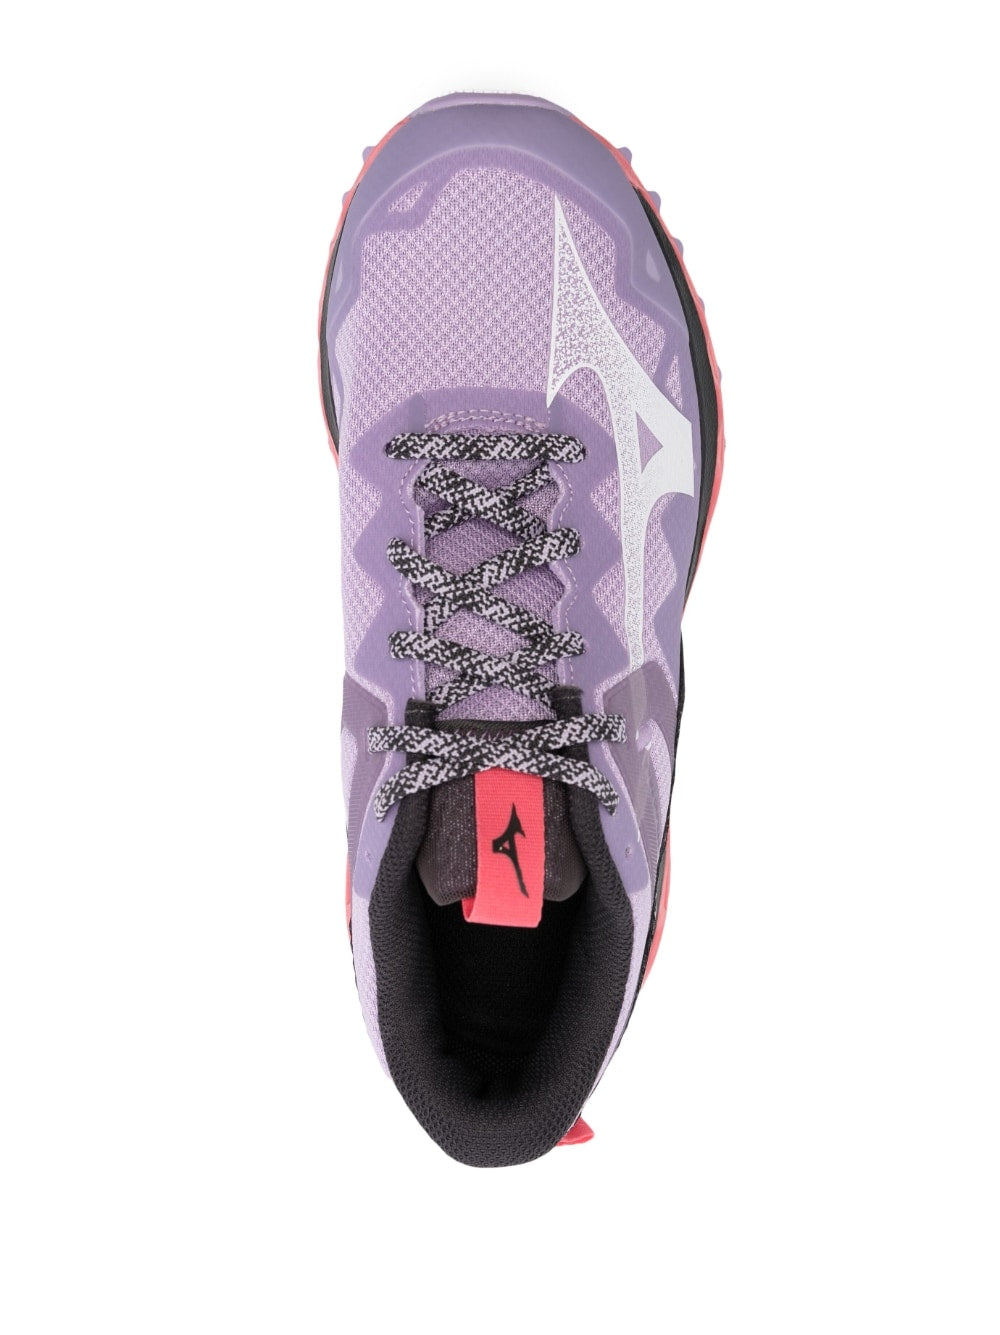 Lilac/white/coral Wave mujin 9 sneakers